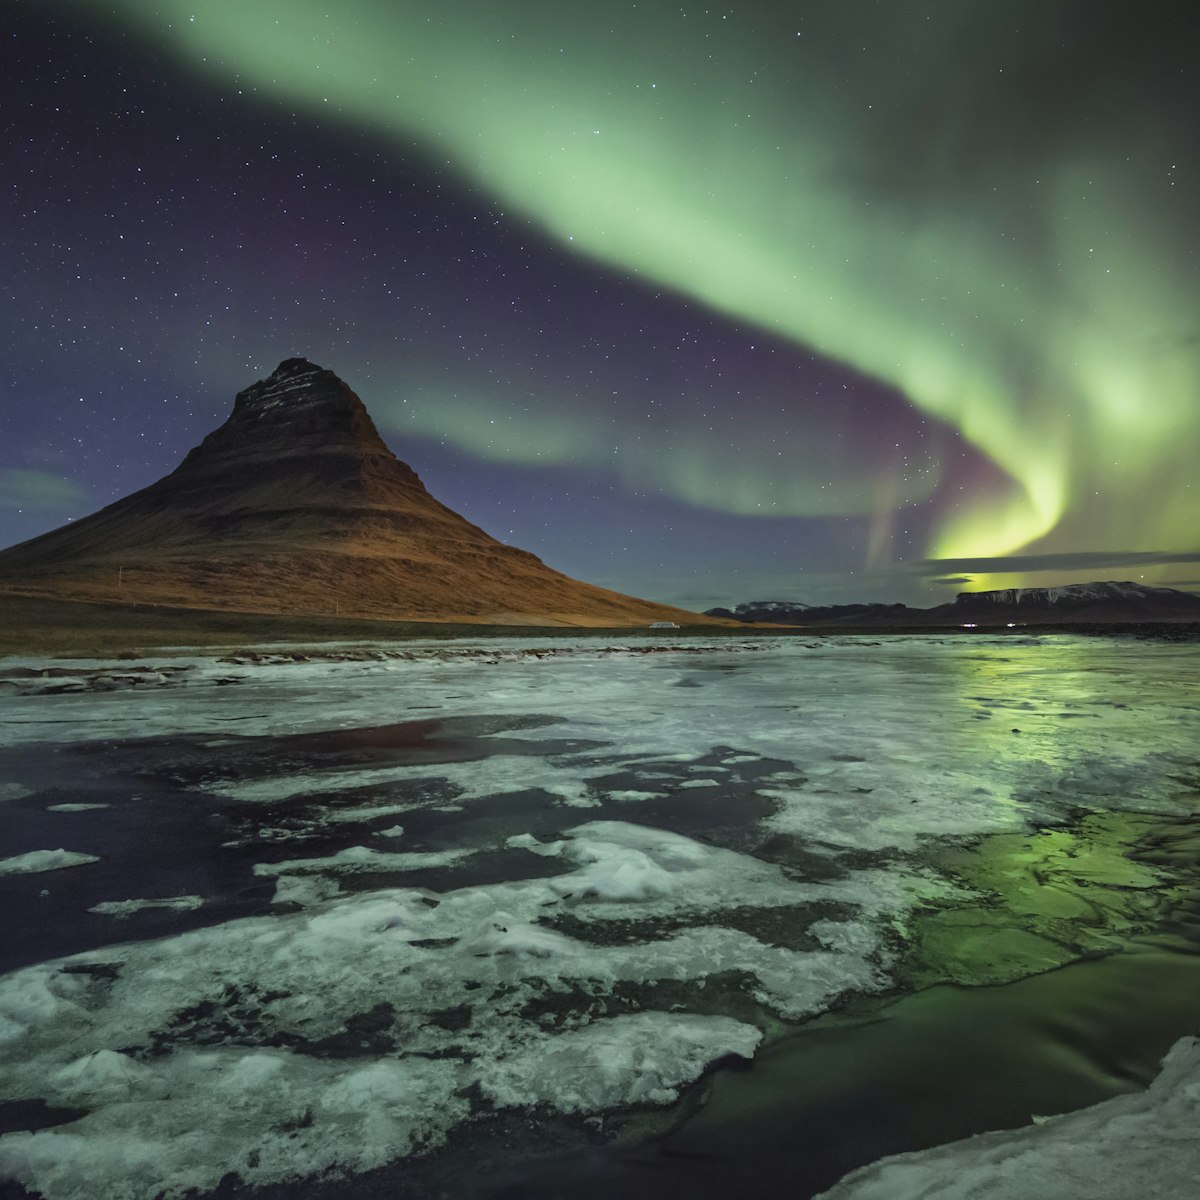 Kirkjufell mountain, Western Iceland, as the aurora really starts to pump out, illuminating the frozen landscape. ....From a superb trip with David Clapp and Antony Spencer